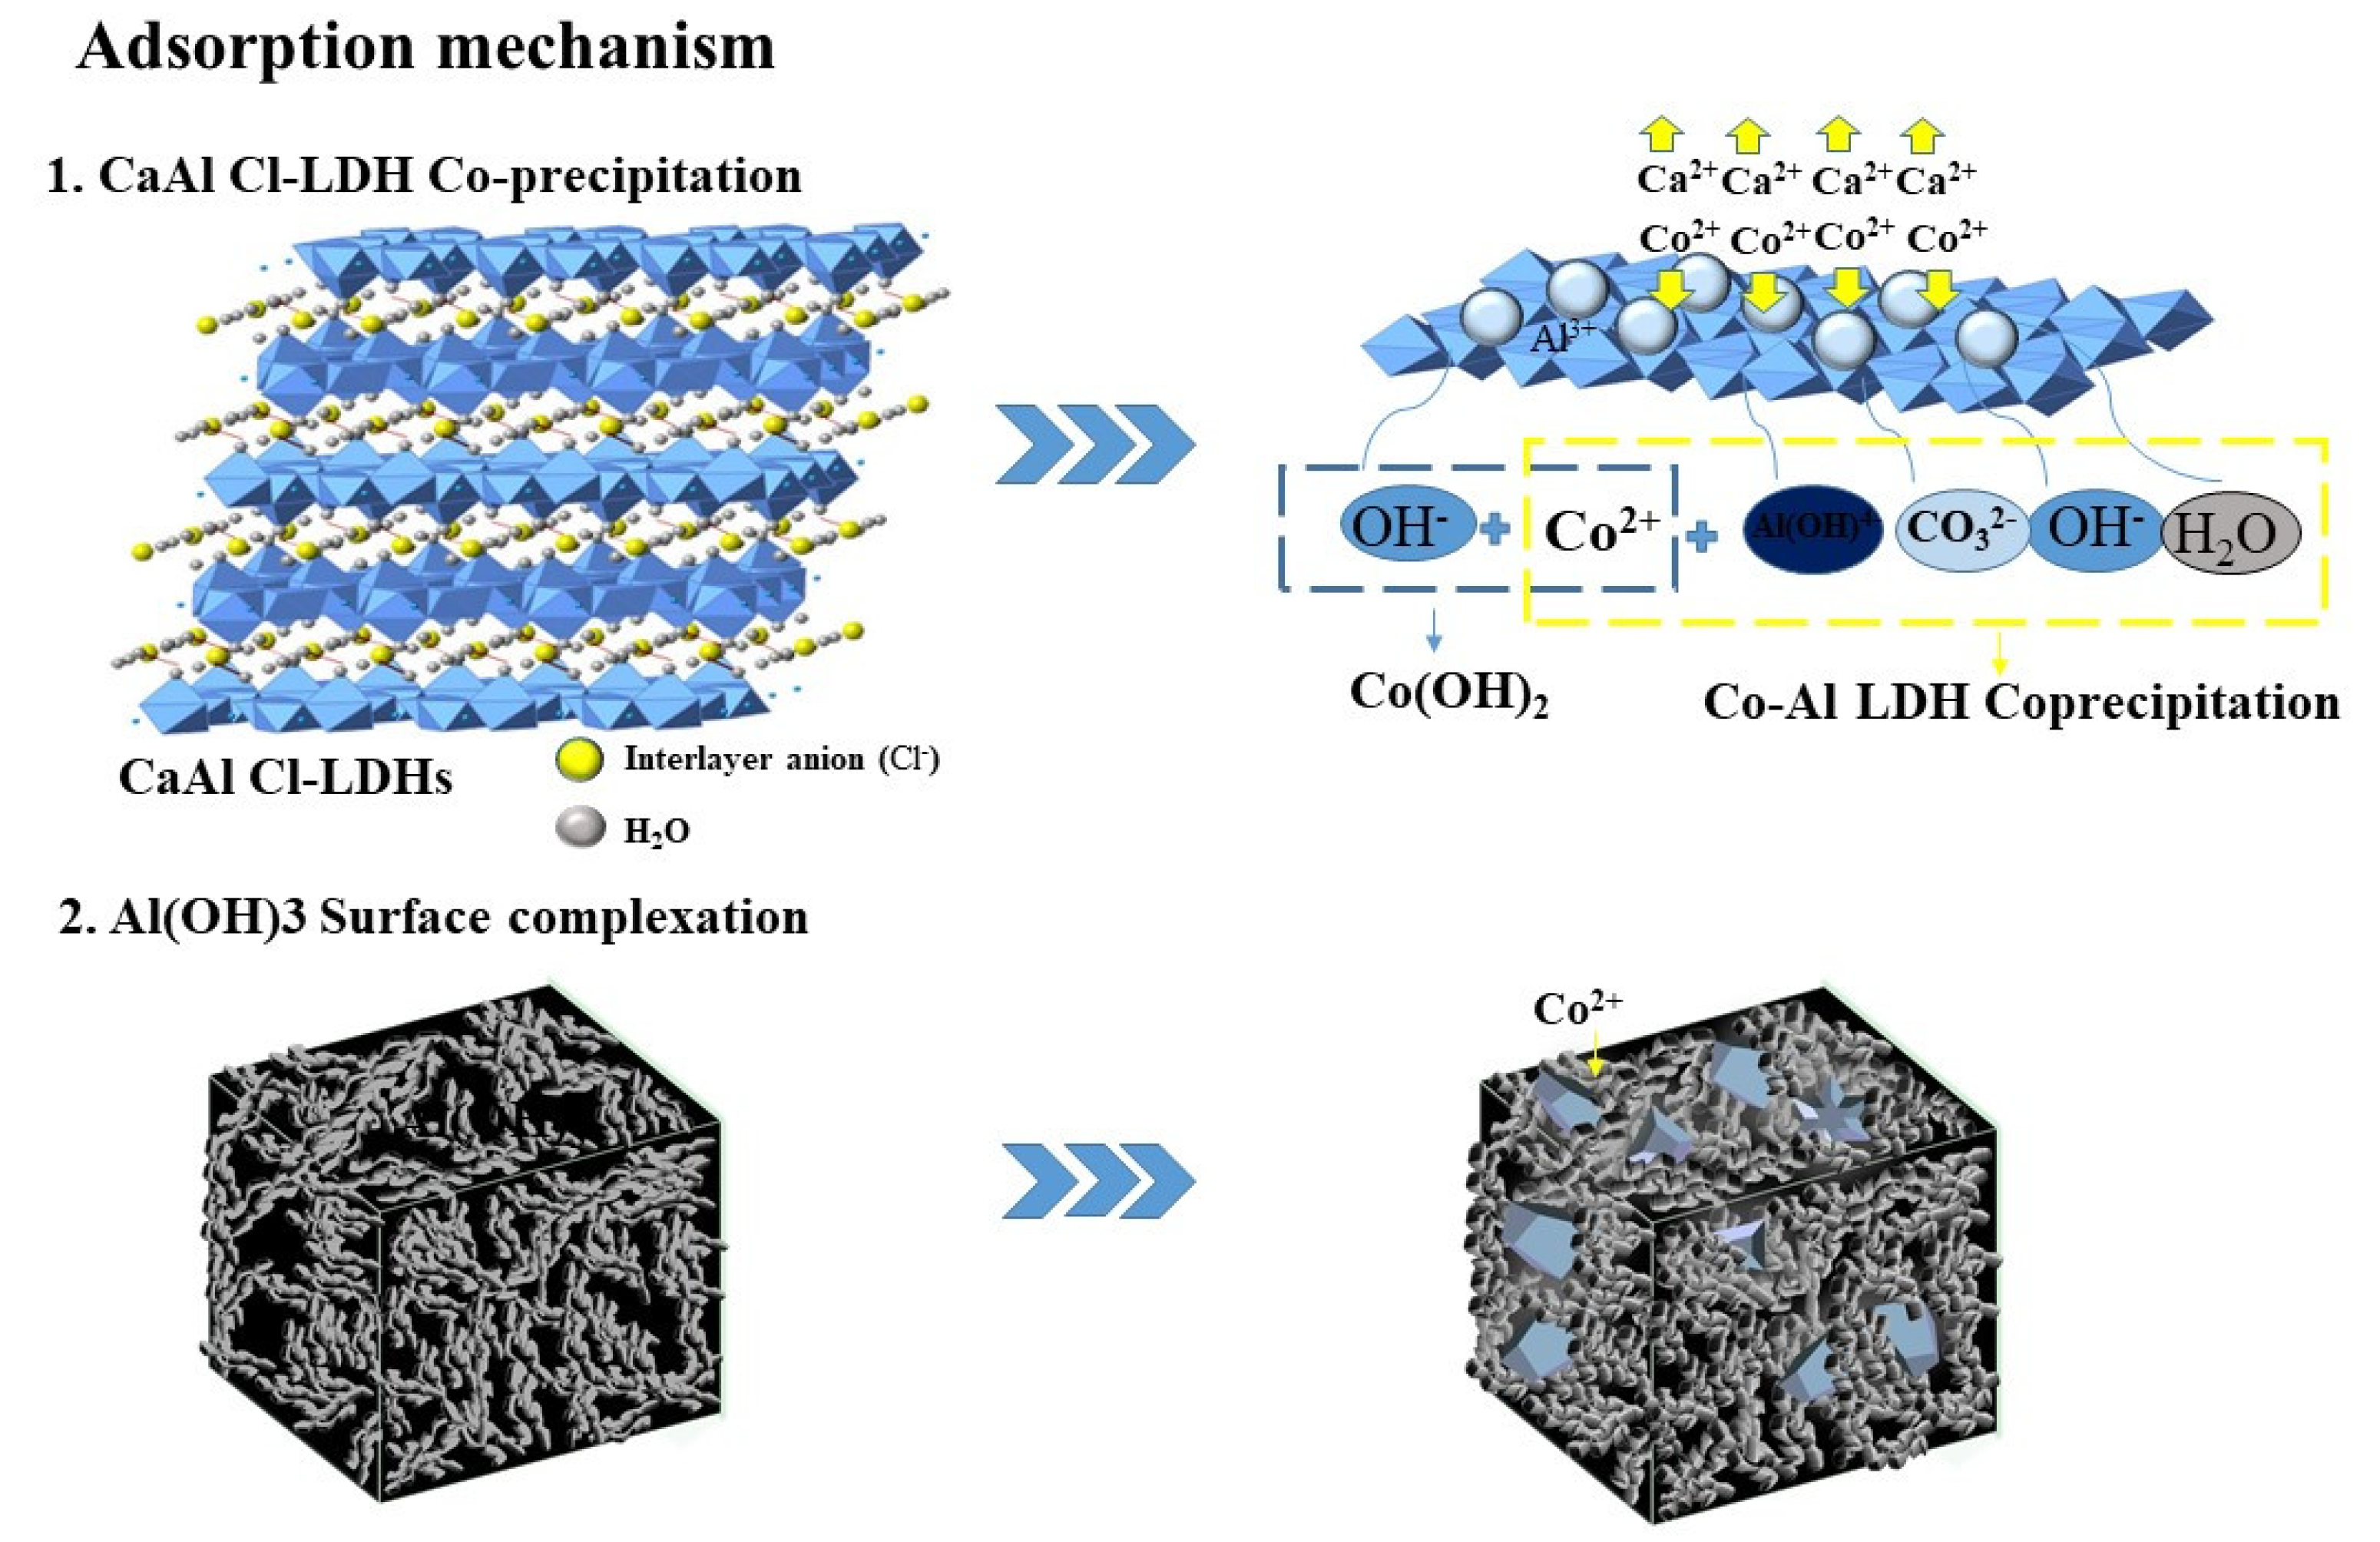 Materials Free Full Text Crystalline Amorphous Blend Identification From Cobalt Adsorption By Layered Double Hydroxides Html